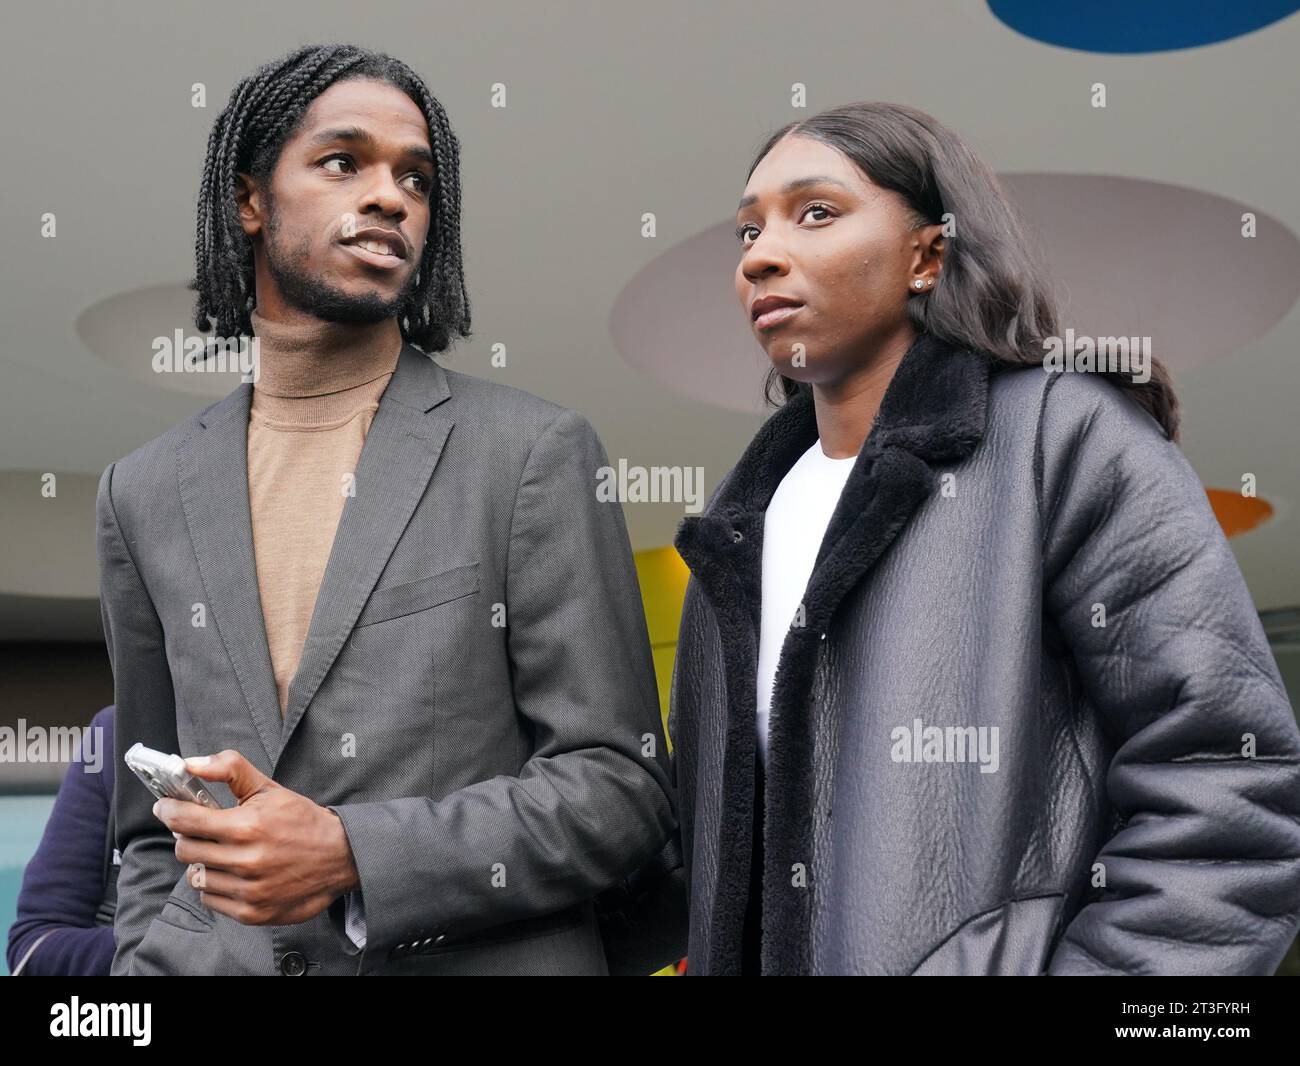 Athletes Bianca Williams and Ricardo Dos Santos speak to the media outside Palestra House, central London, after the judgement was given for the gross misconduct hearing of five Metropolitan Police officers over their stop and search. The disciplinary hearing has found the behaviour of two Metropolitan Police officers - Pc Jonathan Clapham and Pc Sam Franks - amounted to gross misconduct. Acting Police Sergeant Rachel Simpson, Pc Allan Casey and Pc Michael Bond were found not to have breached any standards. Ms Williams and Mr Dos Santos were stopped and handcuffed in Maida Vale, north London i Stock Photo